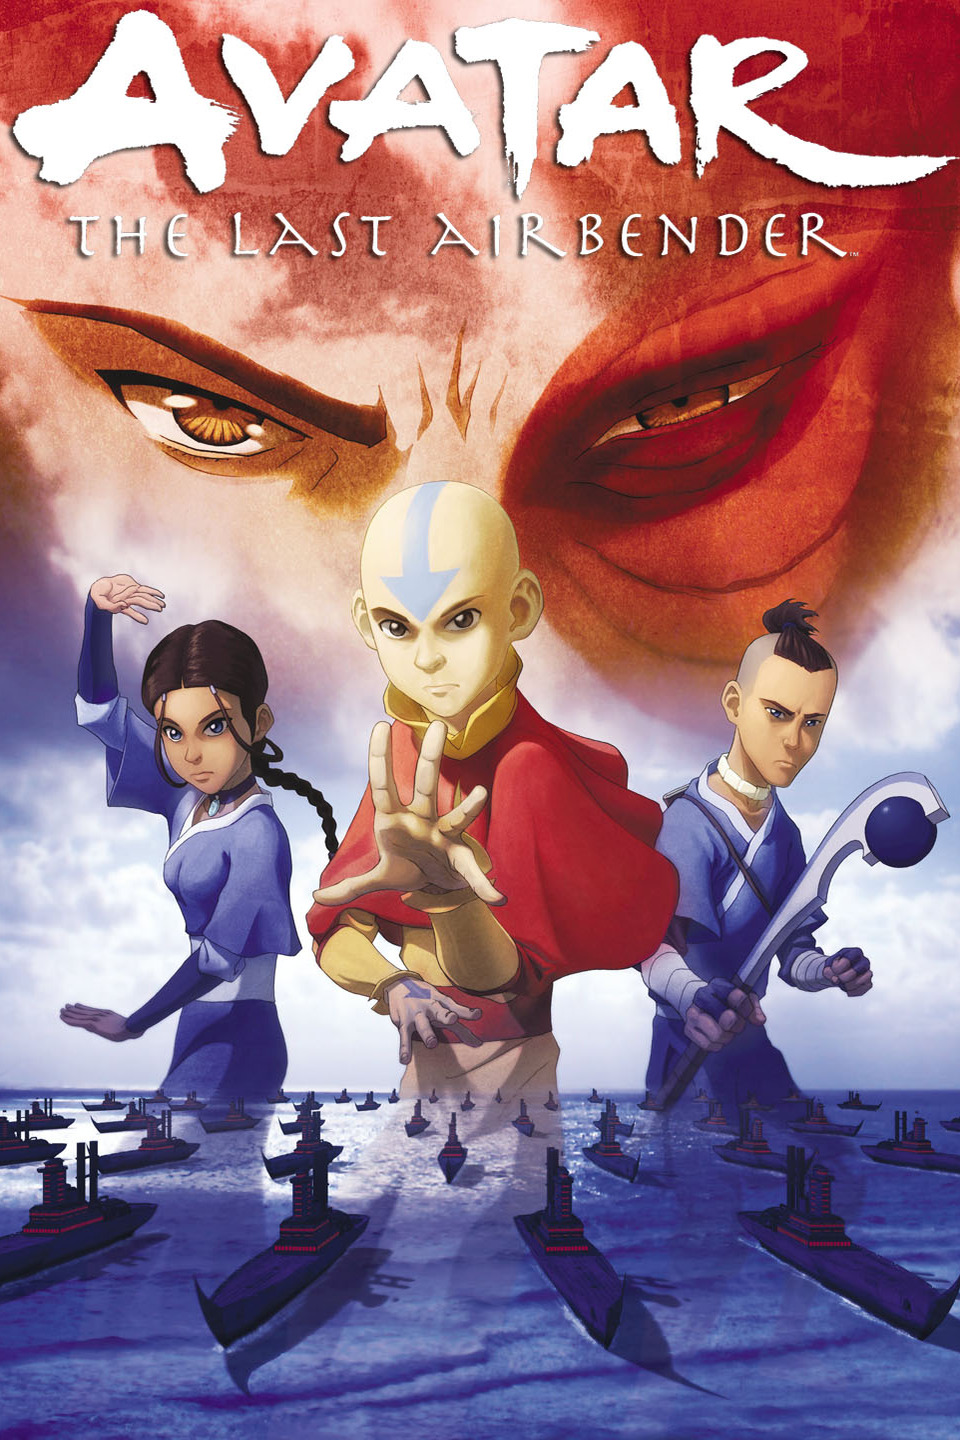 What Will the Avatar The Last Airbender Movie Be About